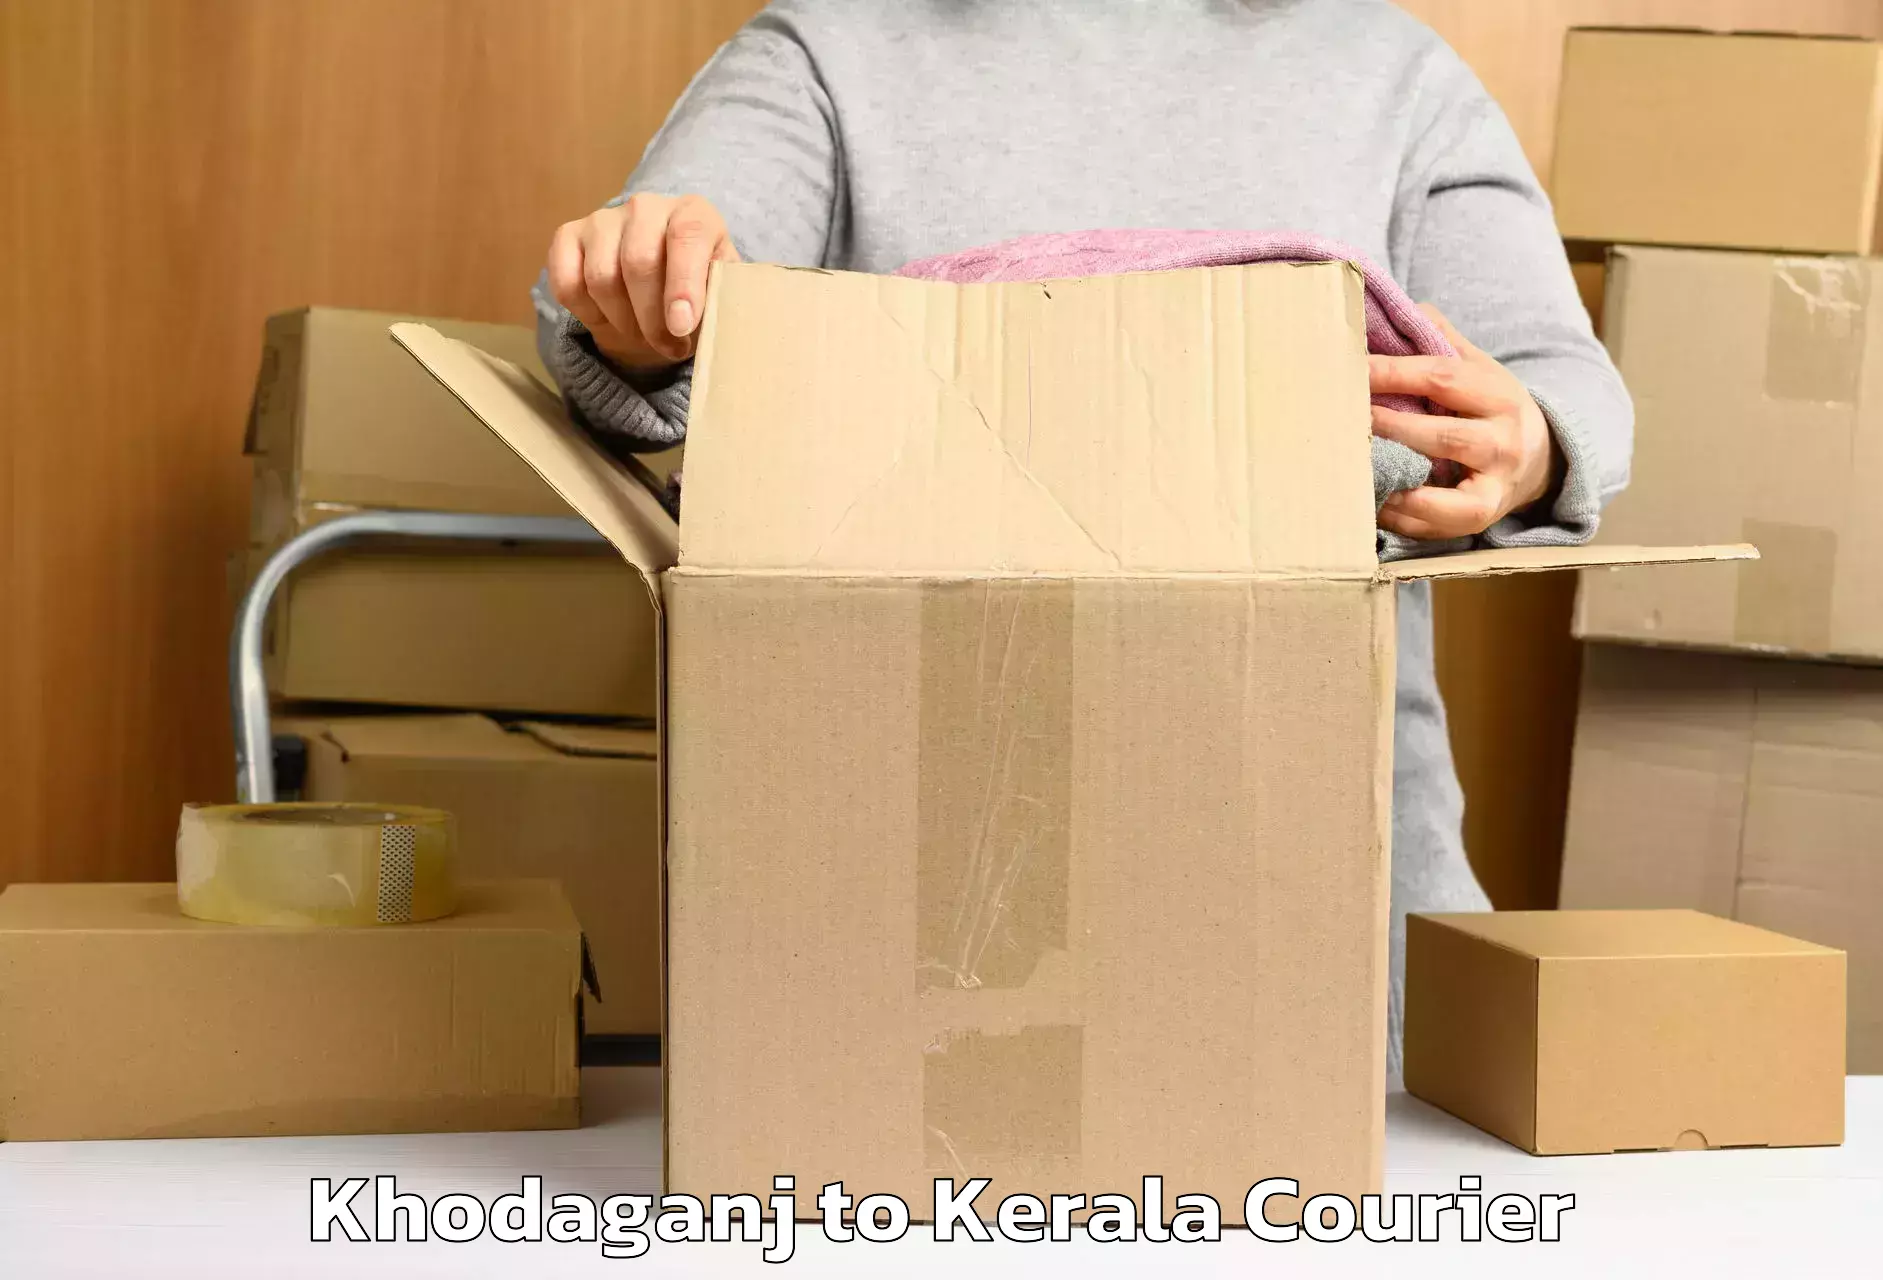 Airport luggage delivery in Khodaganj to Kottayam